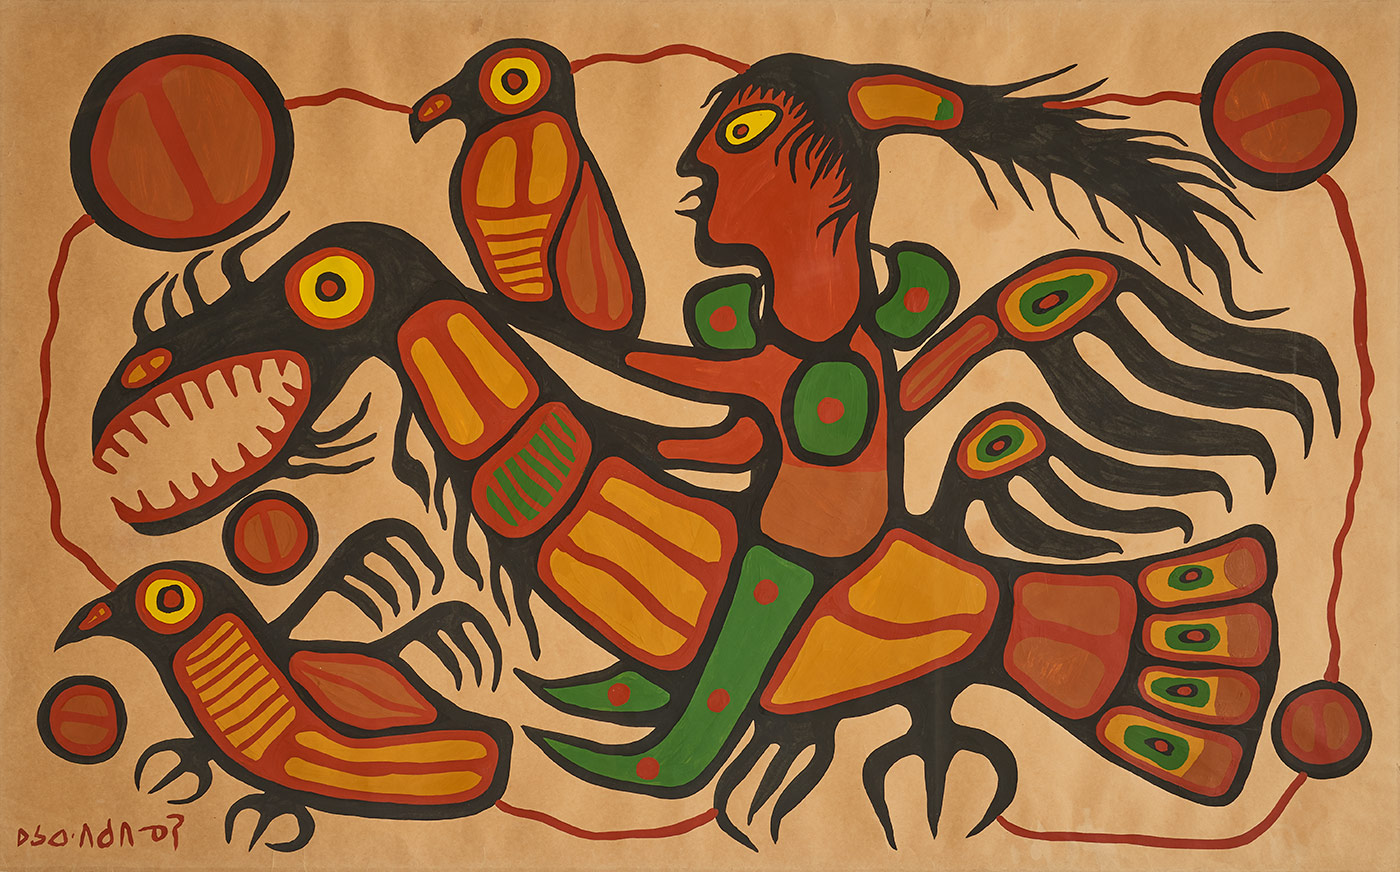 A painting of a Shaman riding a creature alongside two raven-like birds. It is painted in black, orange, yellow, green, and ochre, and brown.